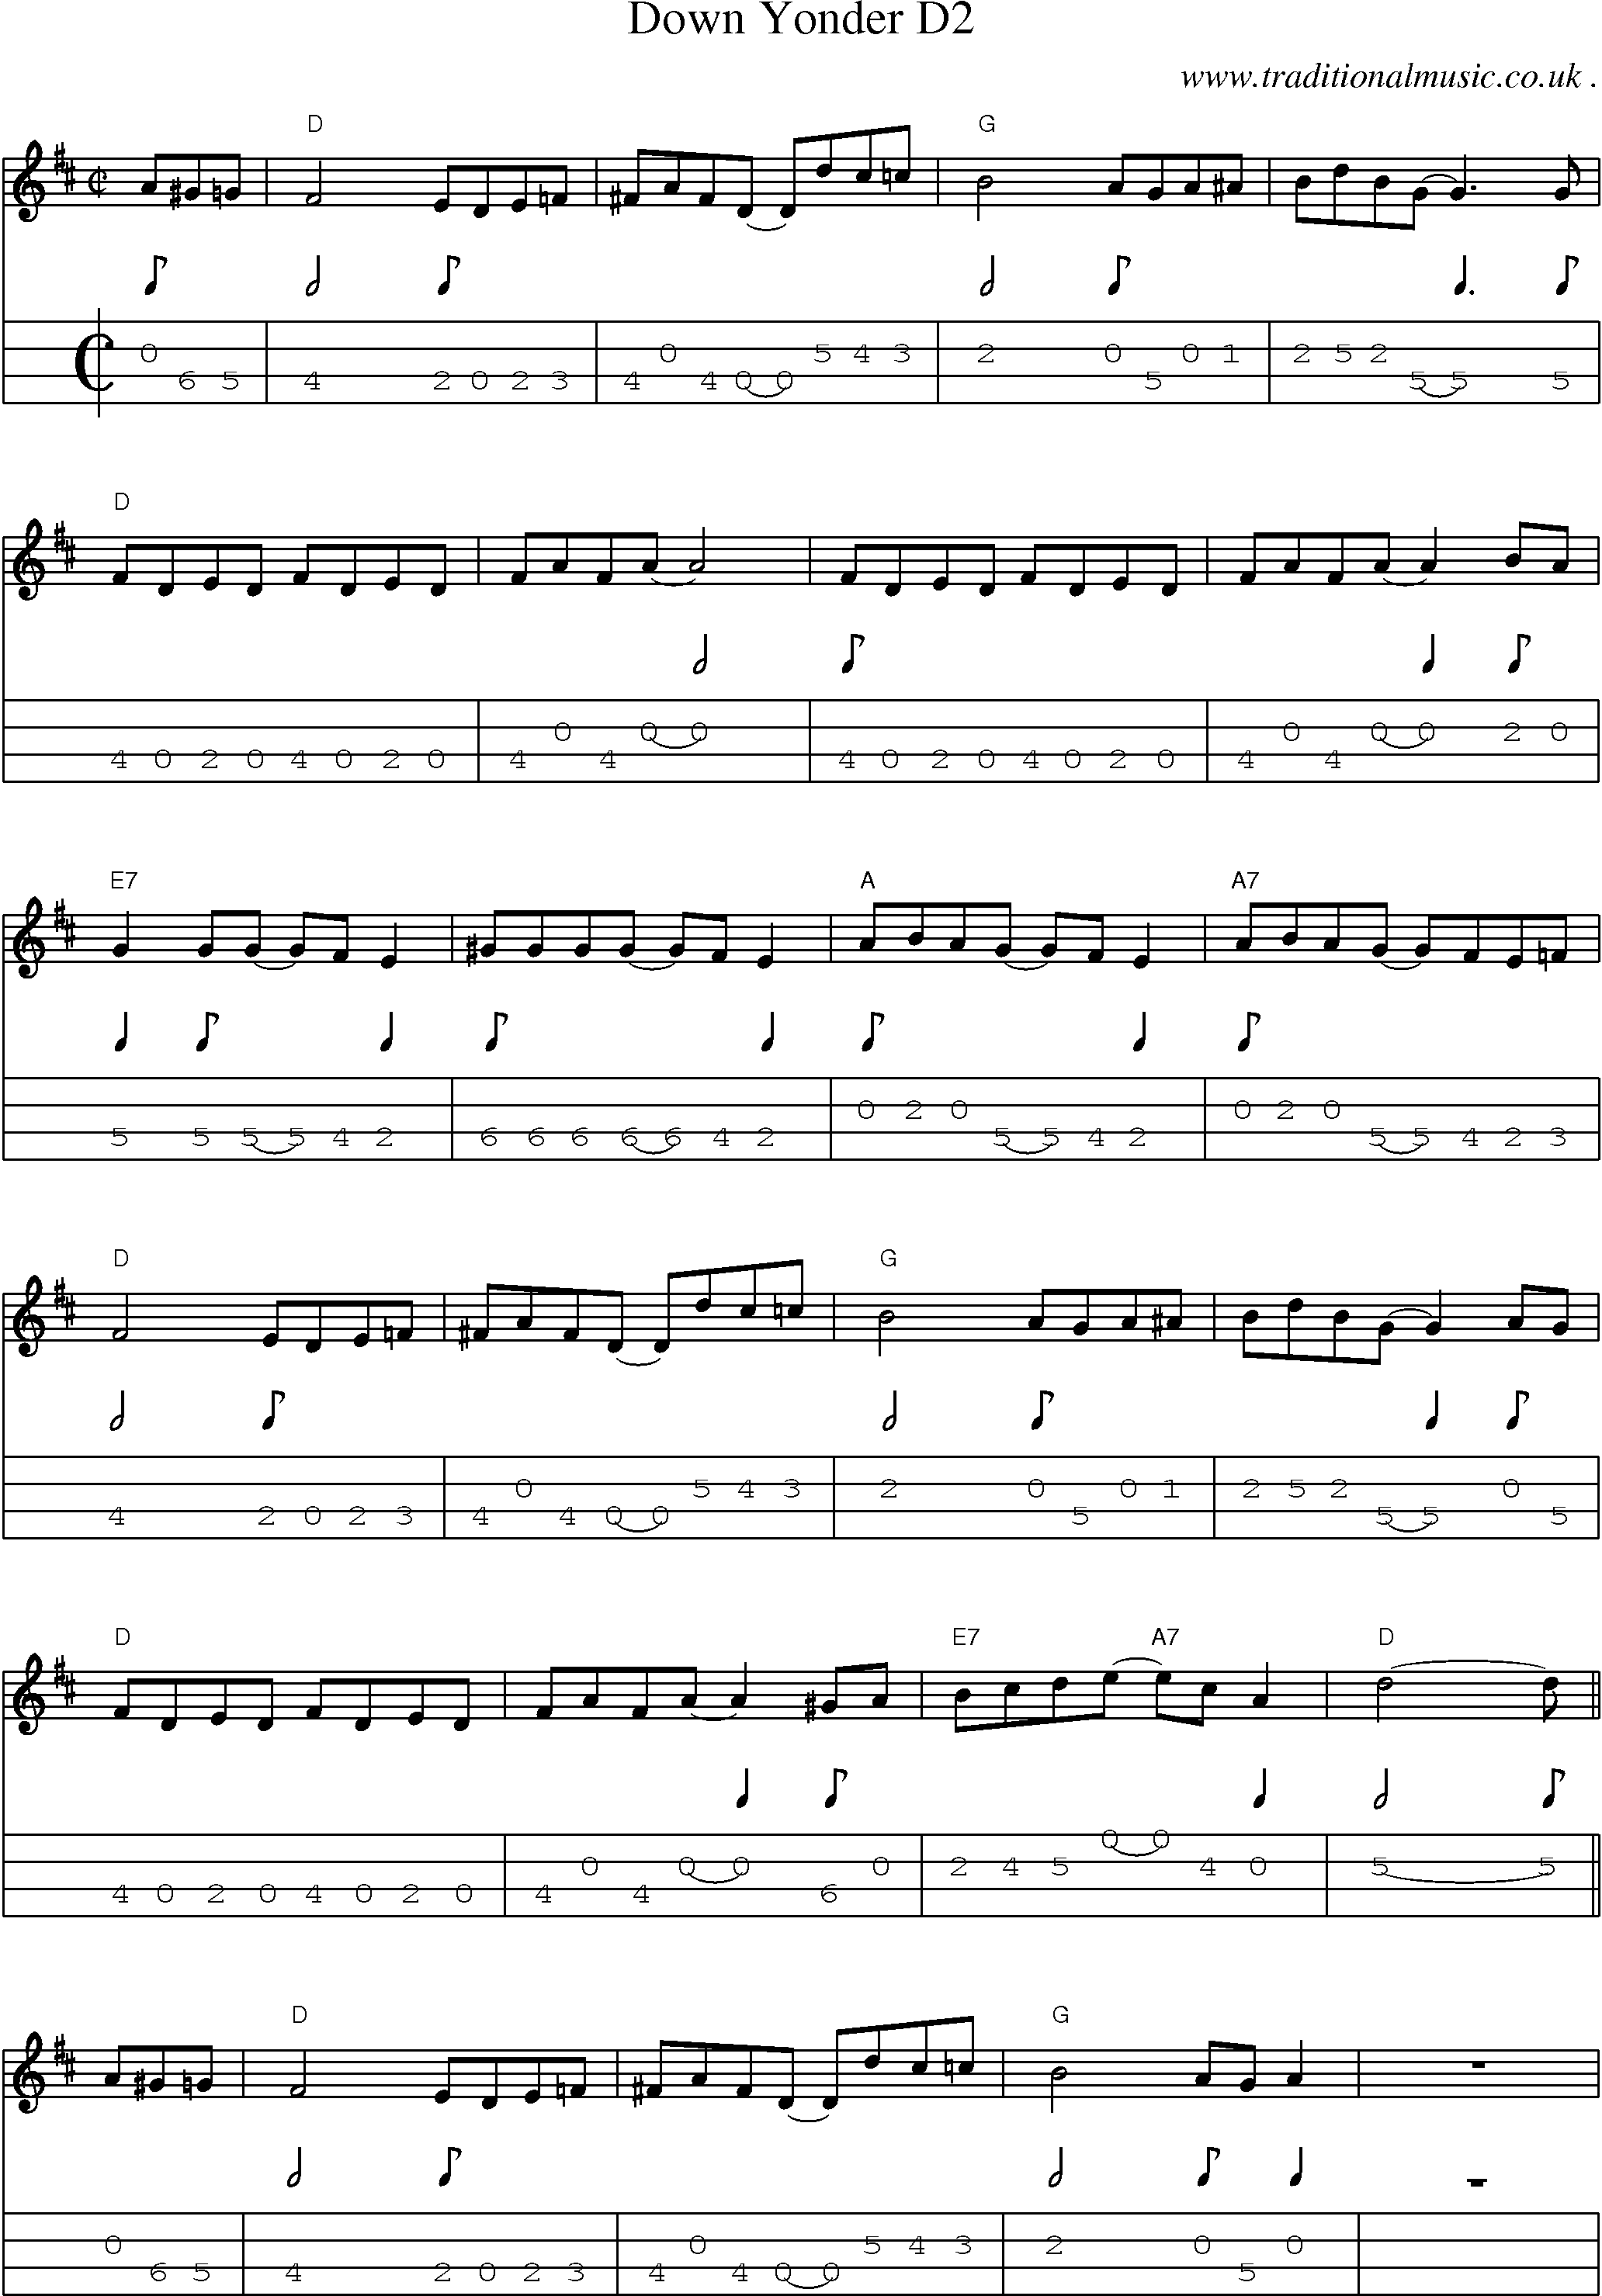 Music Score and Mandolin Tabs for Down Yonder D2